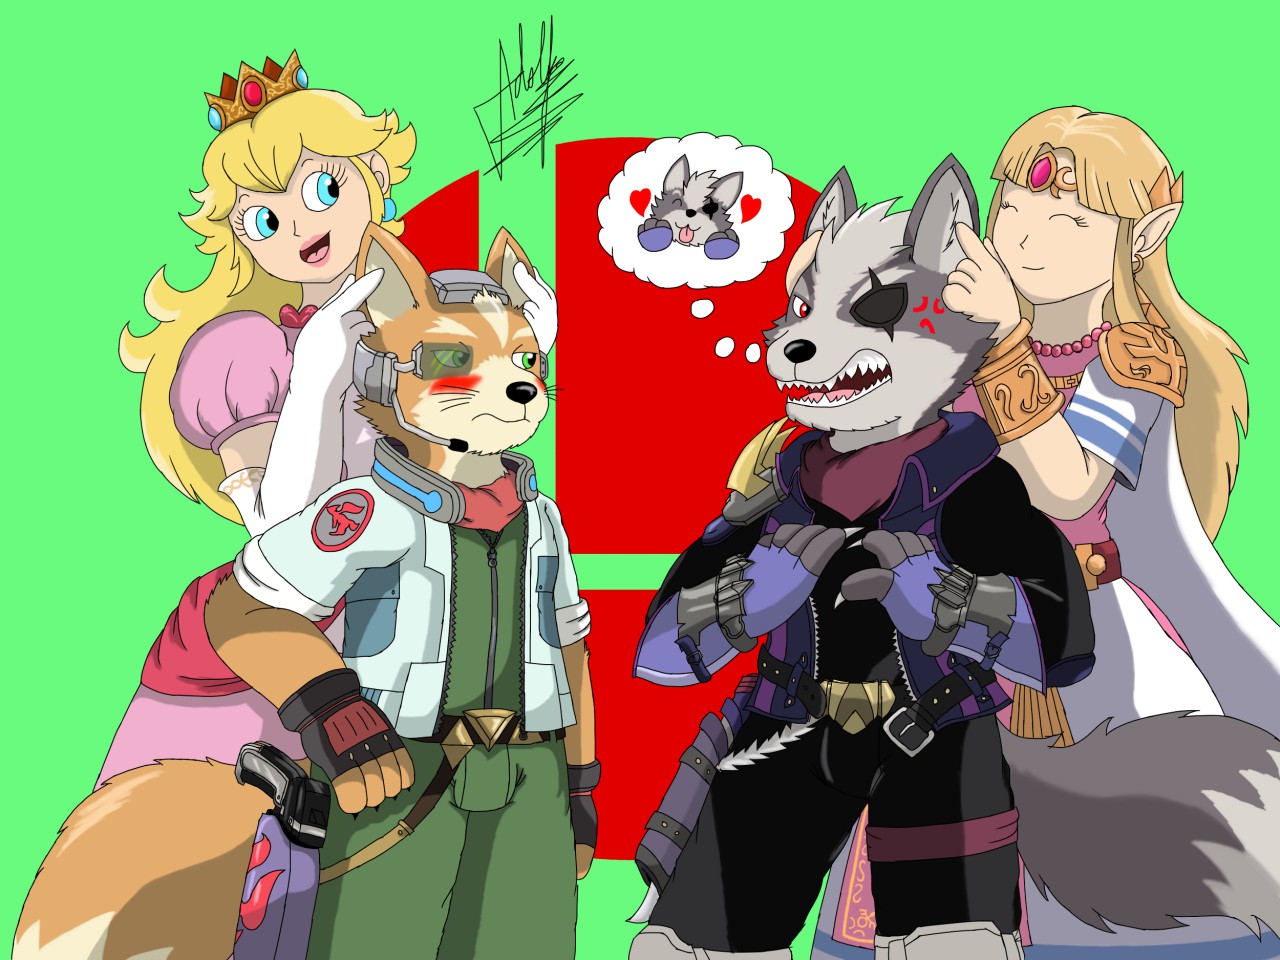 Wolf and Peach's panty shot, Super Smash Brothers